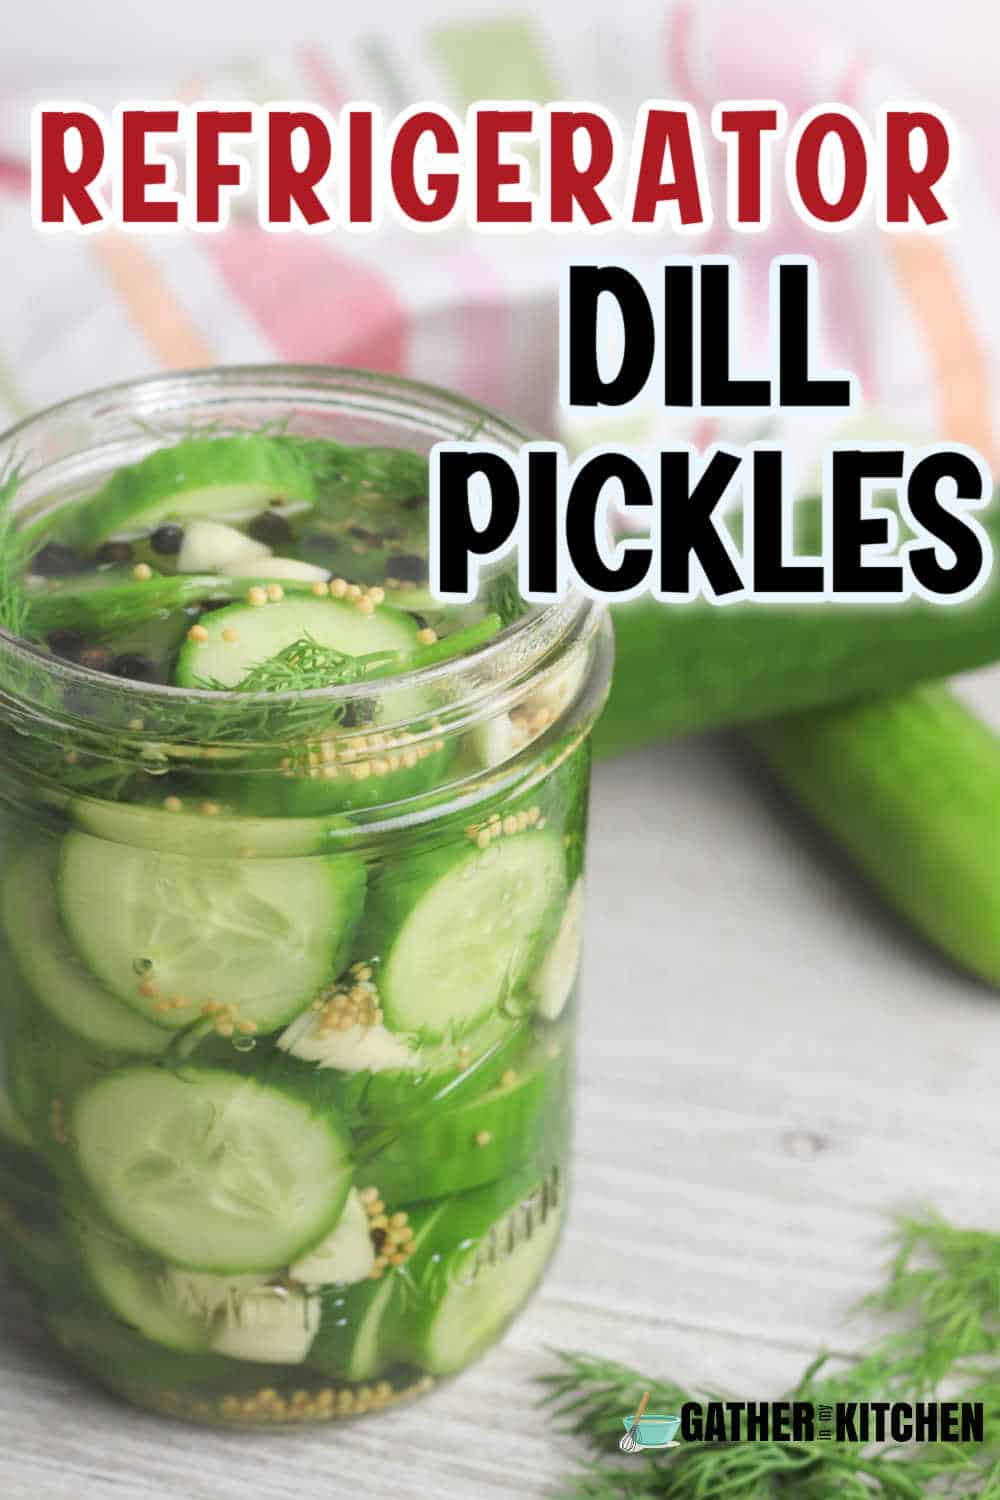 pin image: top says "Dill pickles" and has a background of a jar of refrigerator pickles